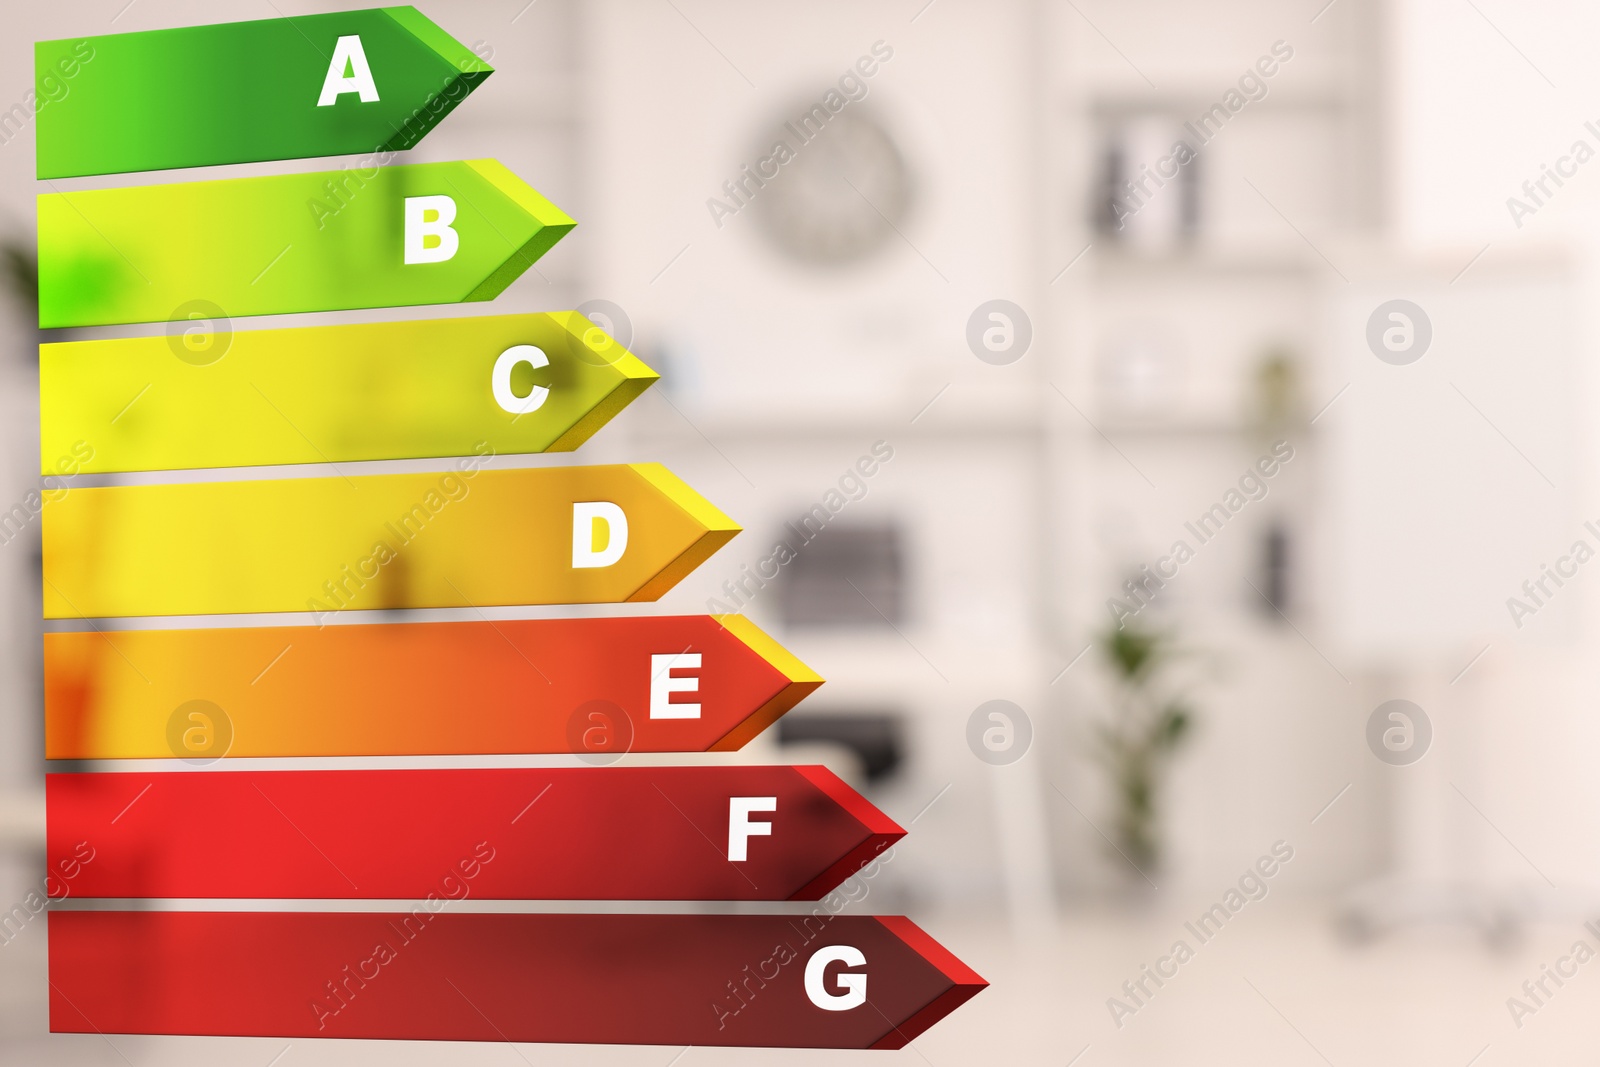 Image of Energy efficiency rating and blurred view of room interior